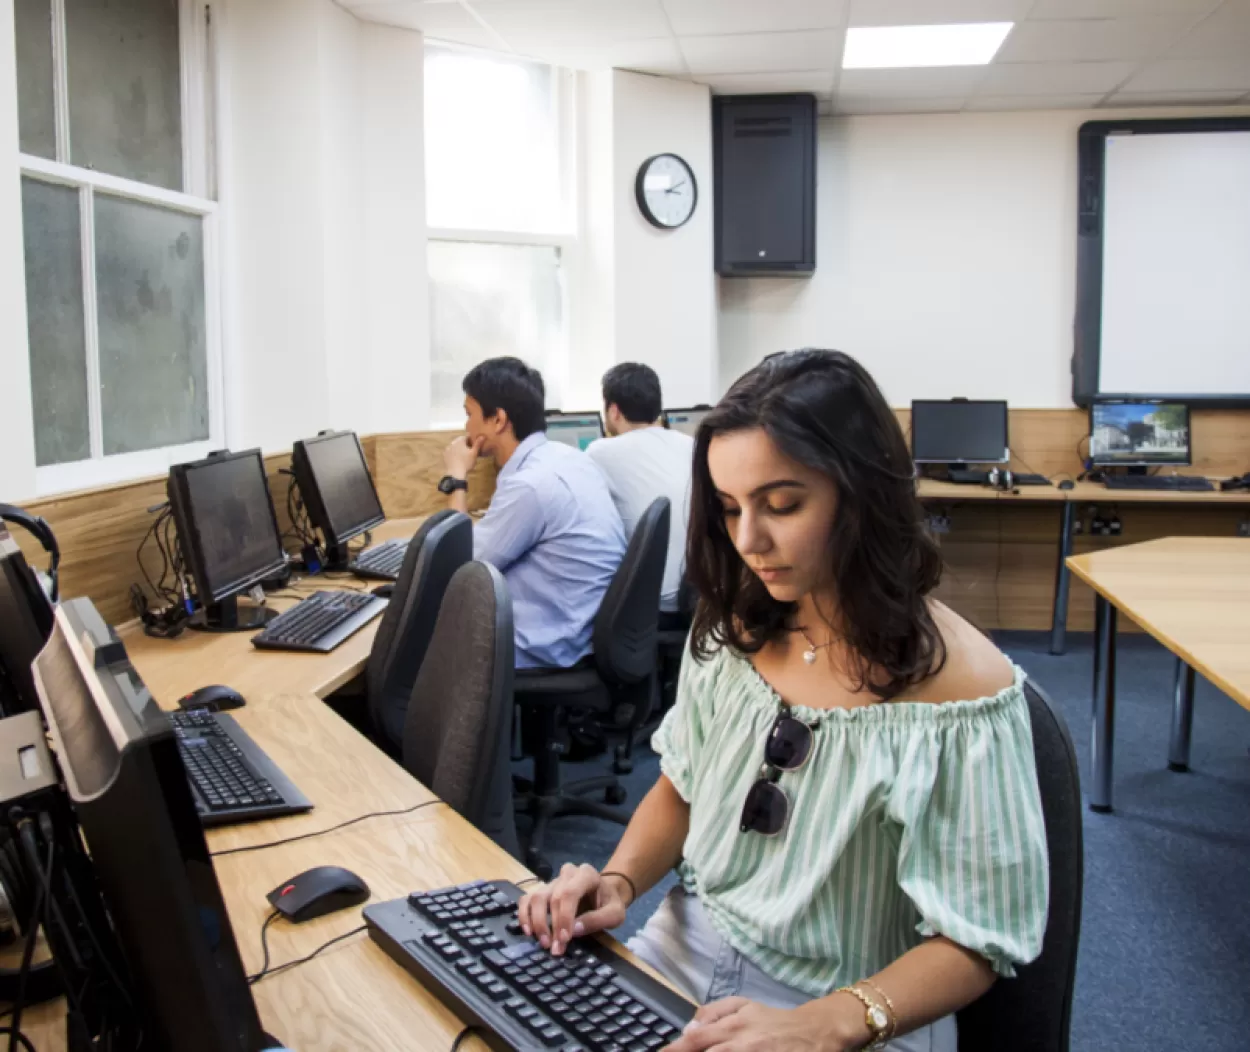 Students concentrate on their work in the computer room at ELC English language school in Brighton, UK.